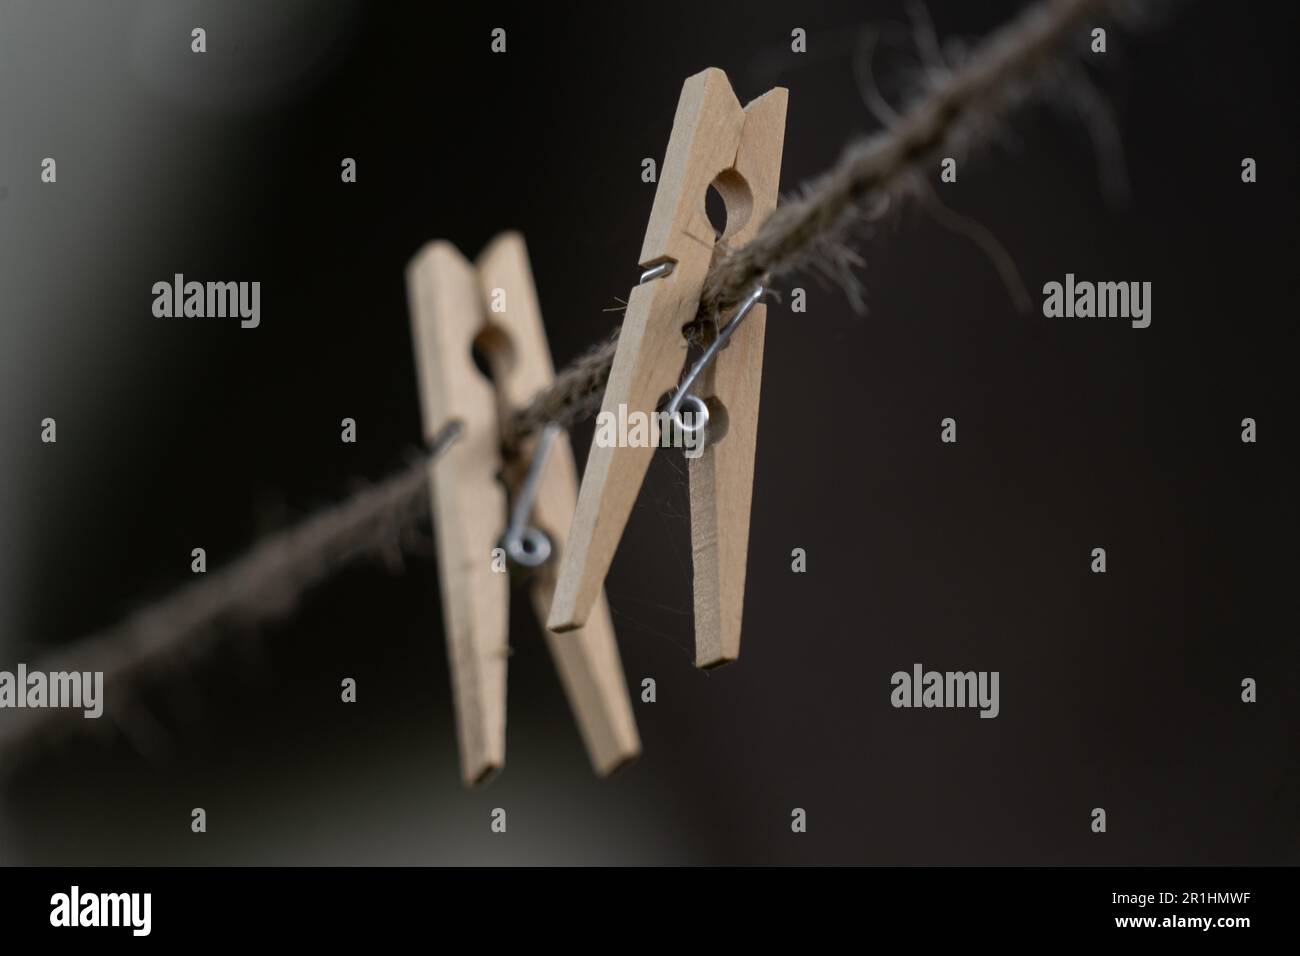 Wooden clothespins on an old washing line photographed with shallow focus Stock Photo